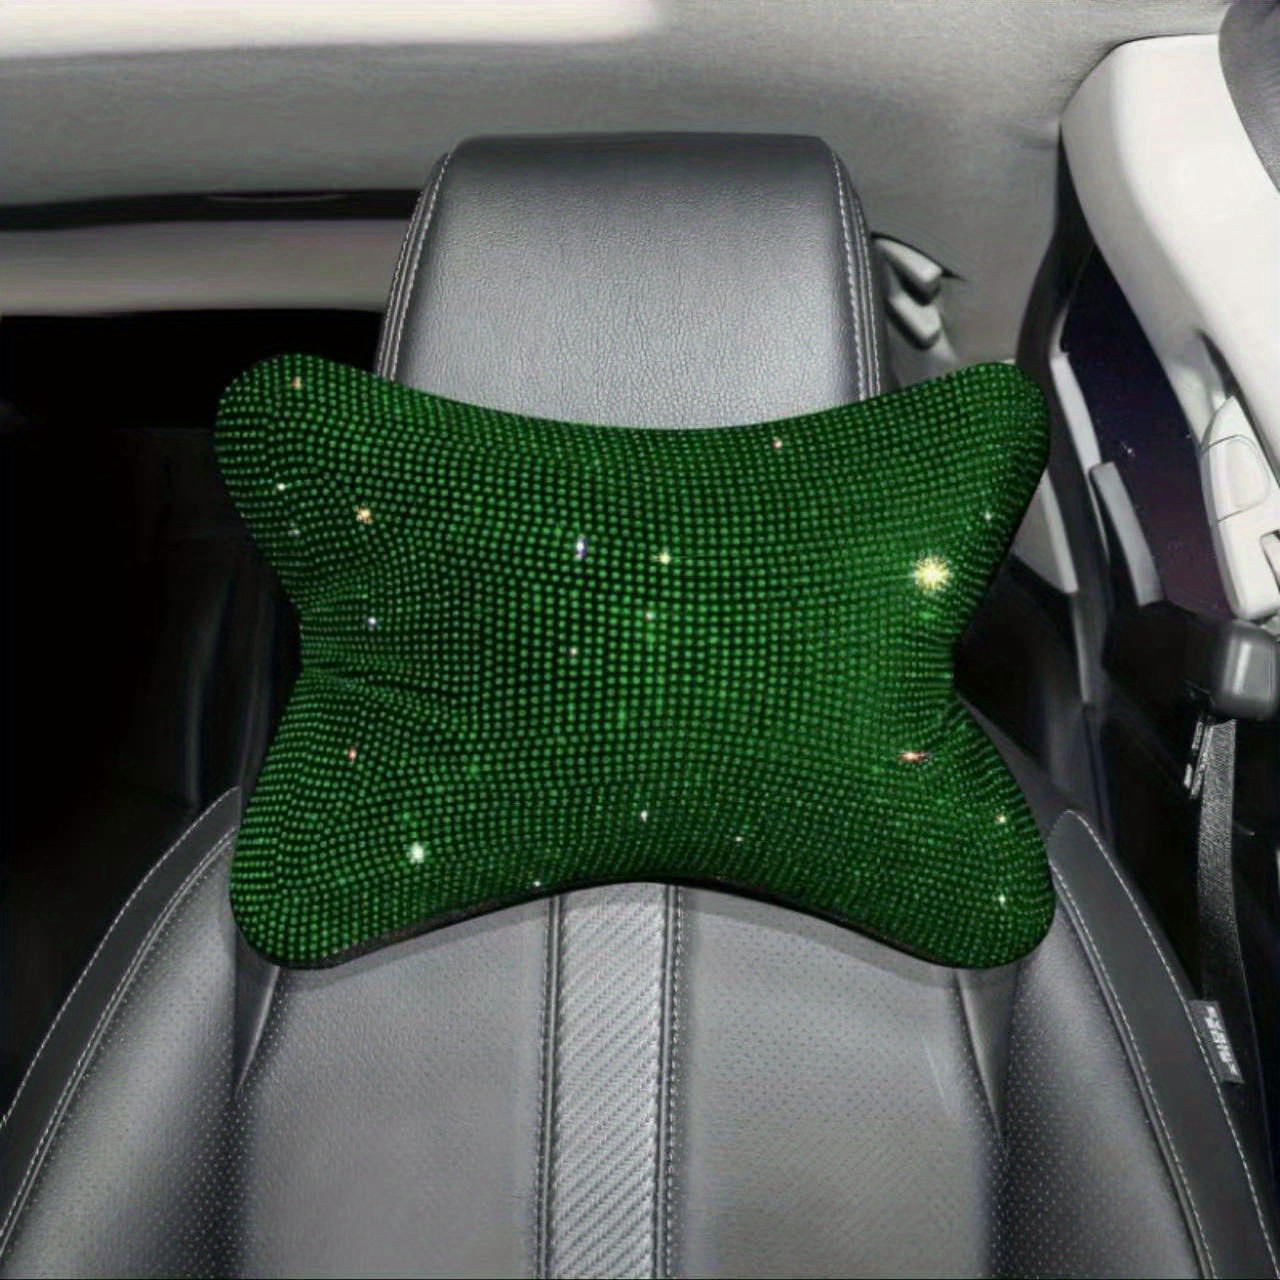 Bling Green Seat Covers for Cars Accessori for Women full set